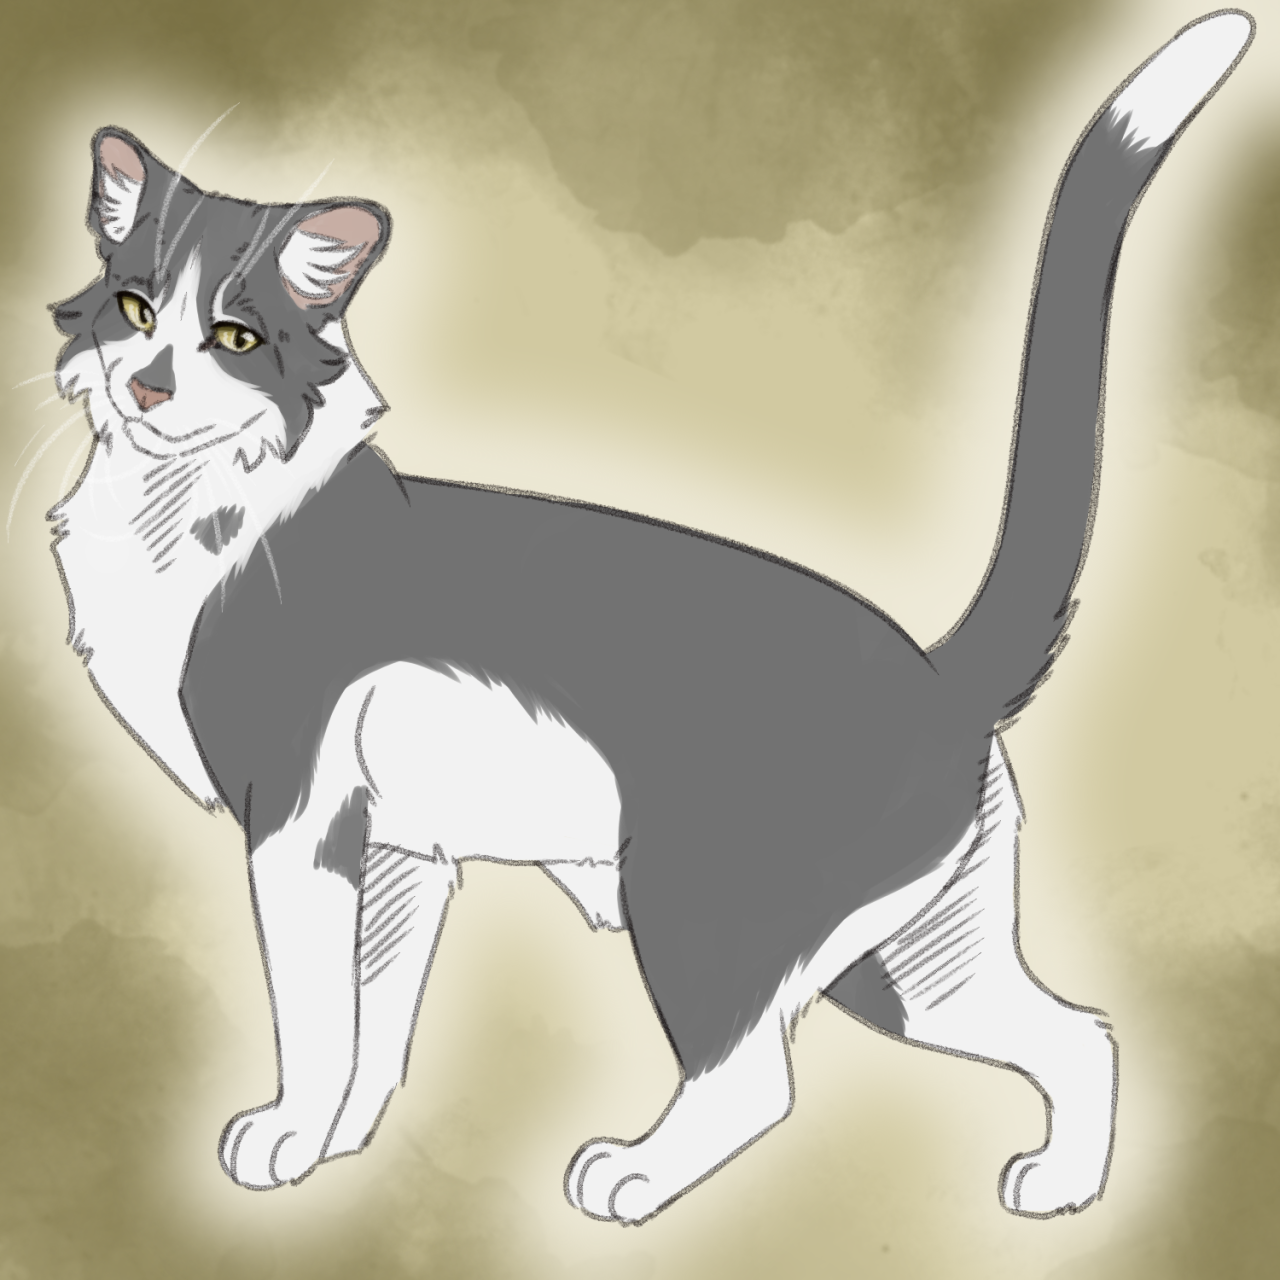 Slugs genetically accurate cats — Ashfur redo (Blue spotted tabby with low  white